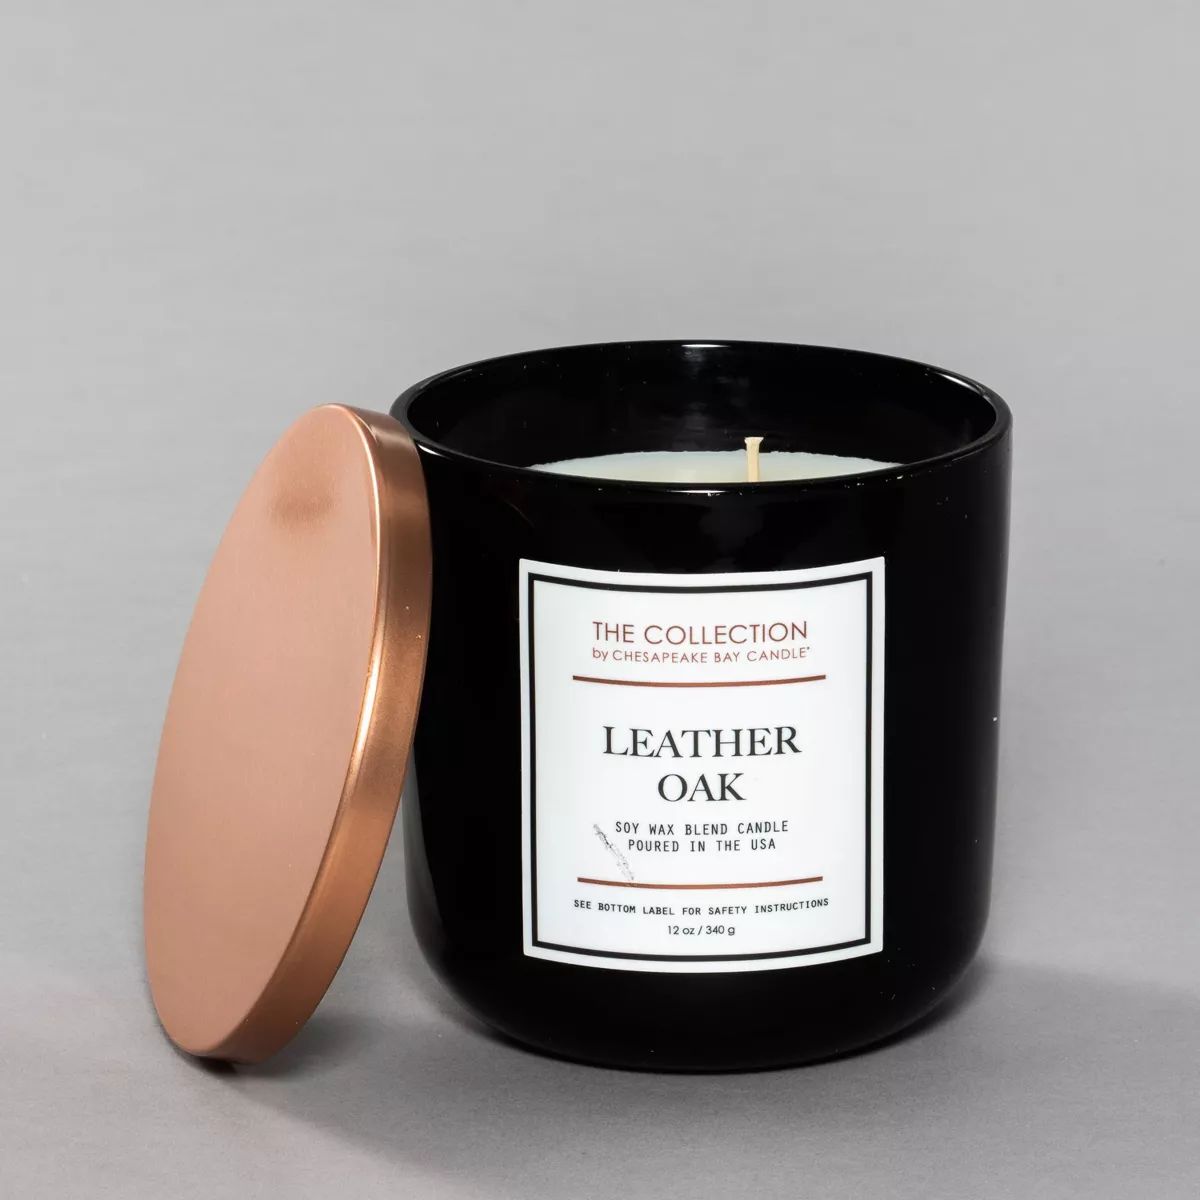 2-Wick Black Glass Leather Oak Lidded Jar Candle 12oz - The Collection by Chesapeake Bay Candle | Target